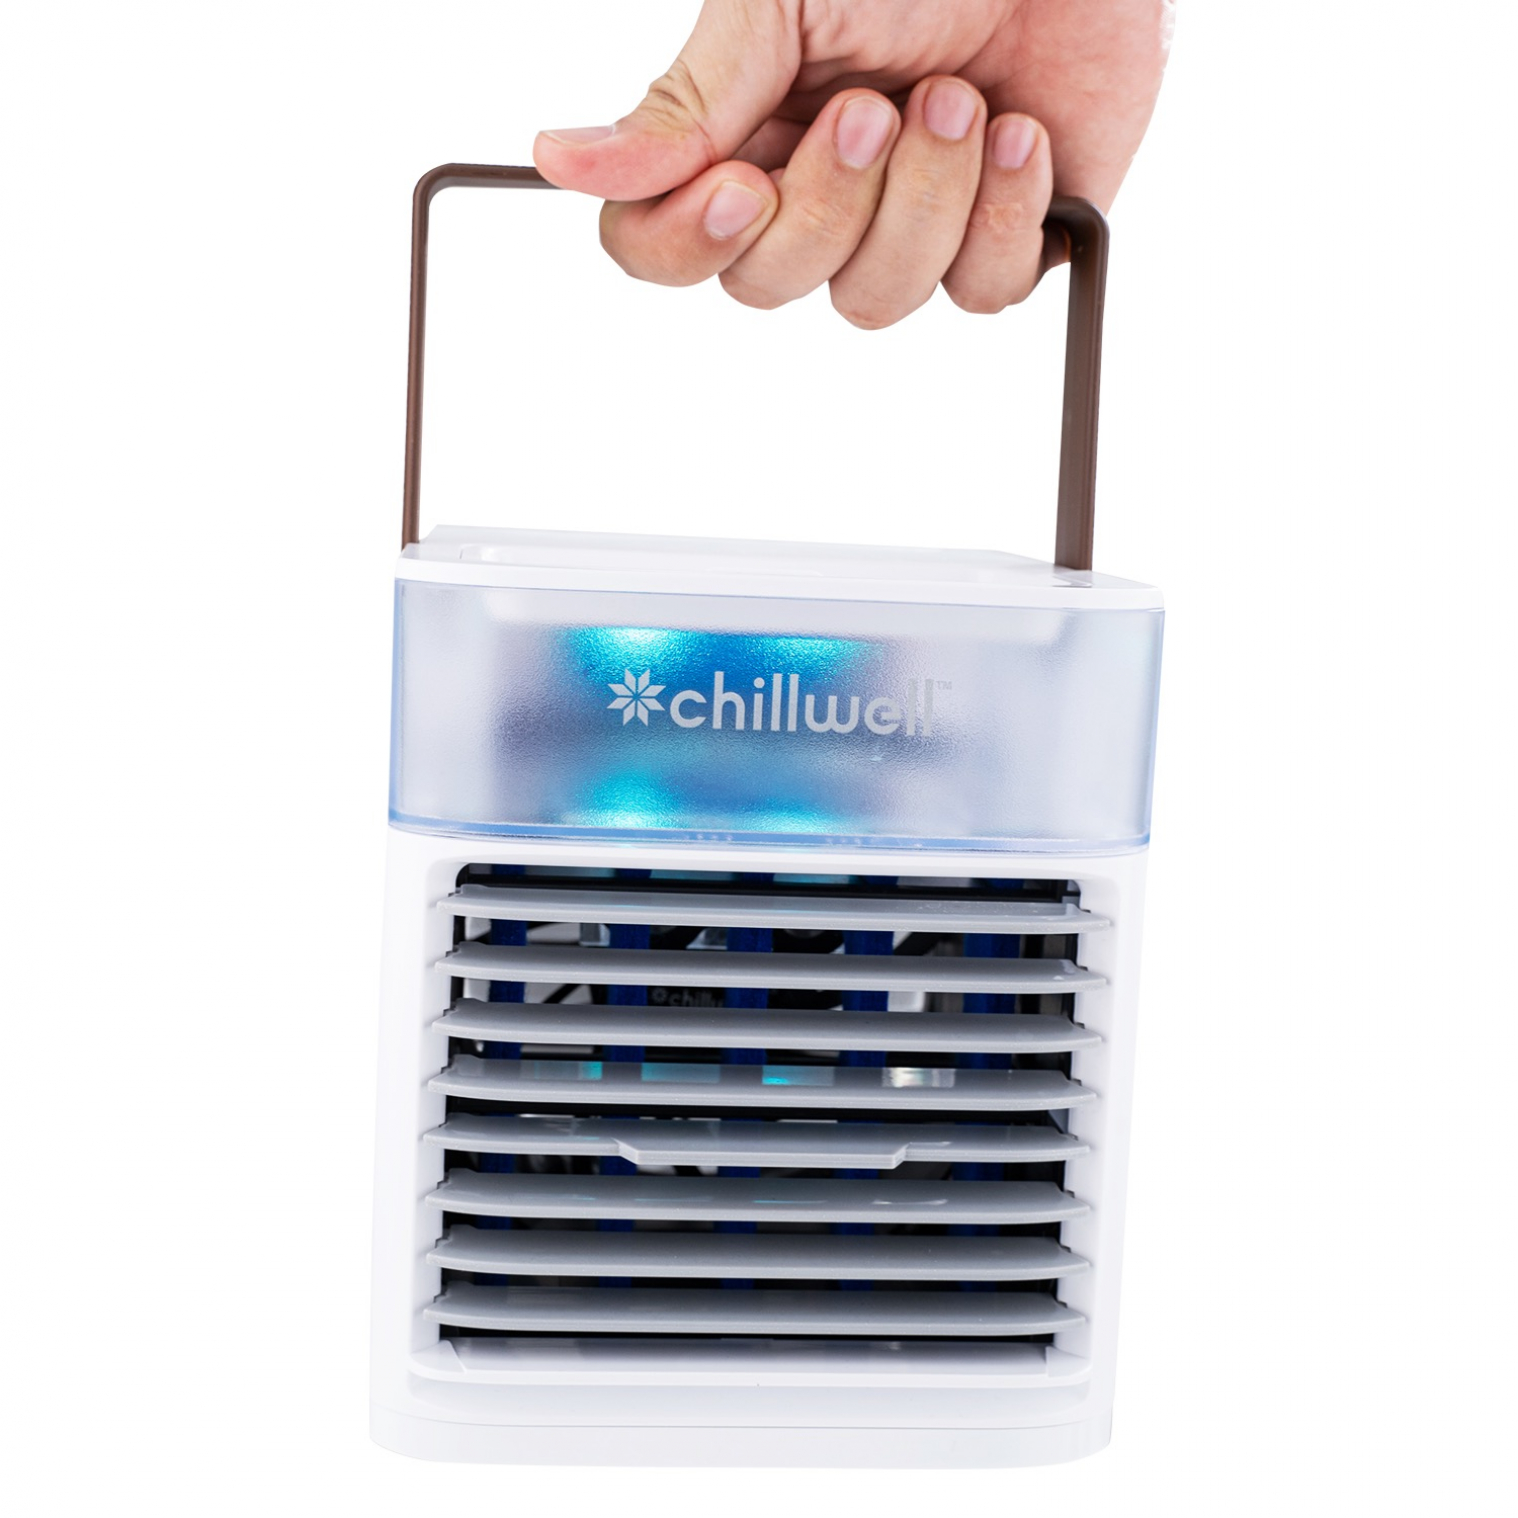 How Does The Chillwell AC Work